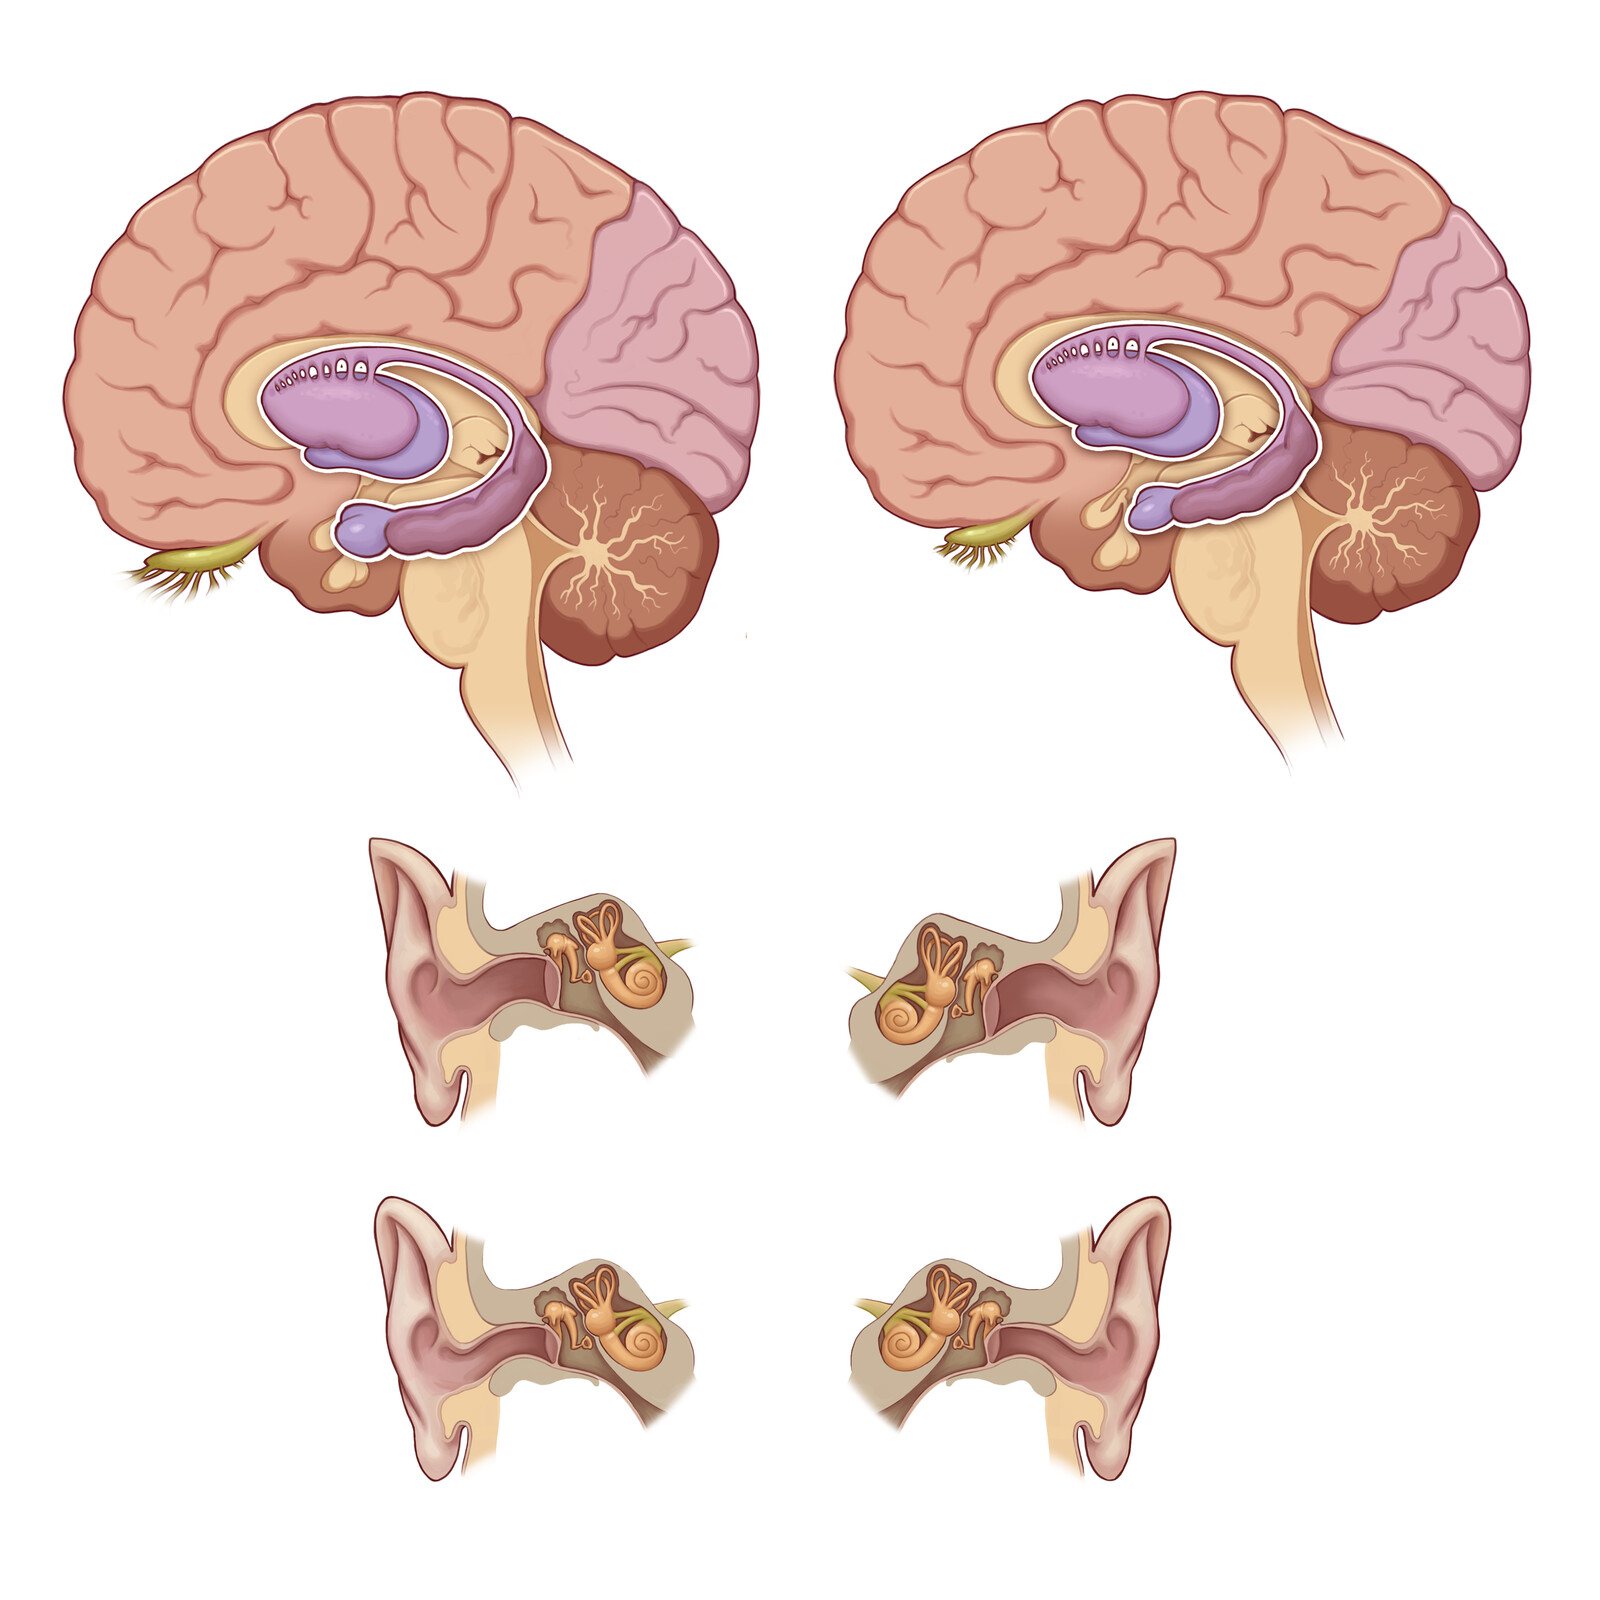 Comparing the Draculodon's brain to the regular human one. 